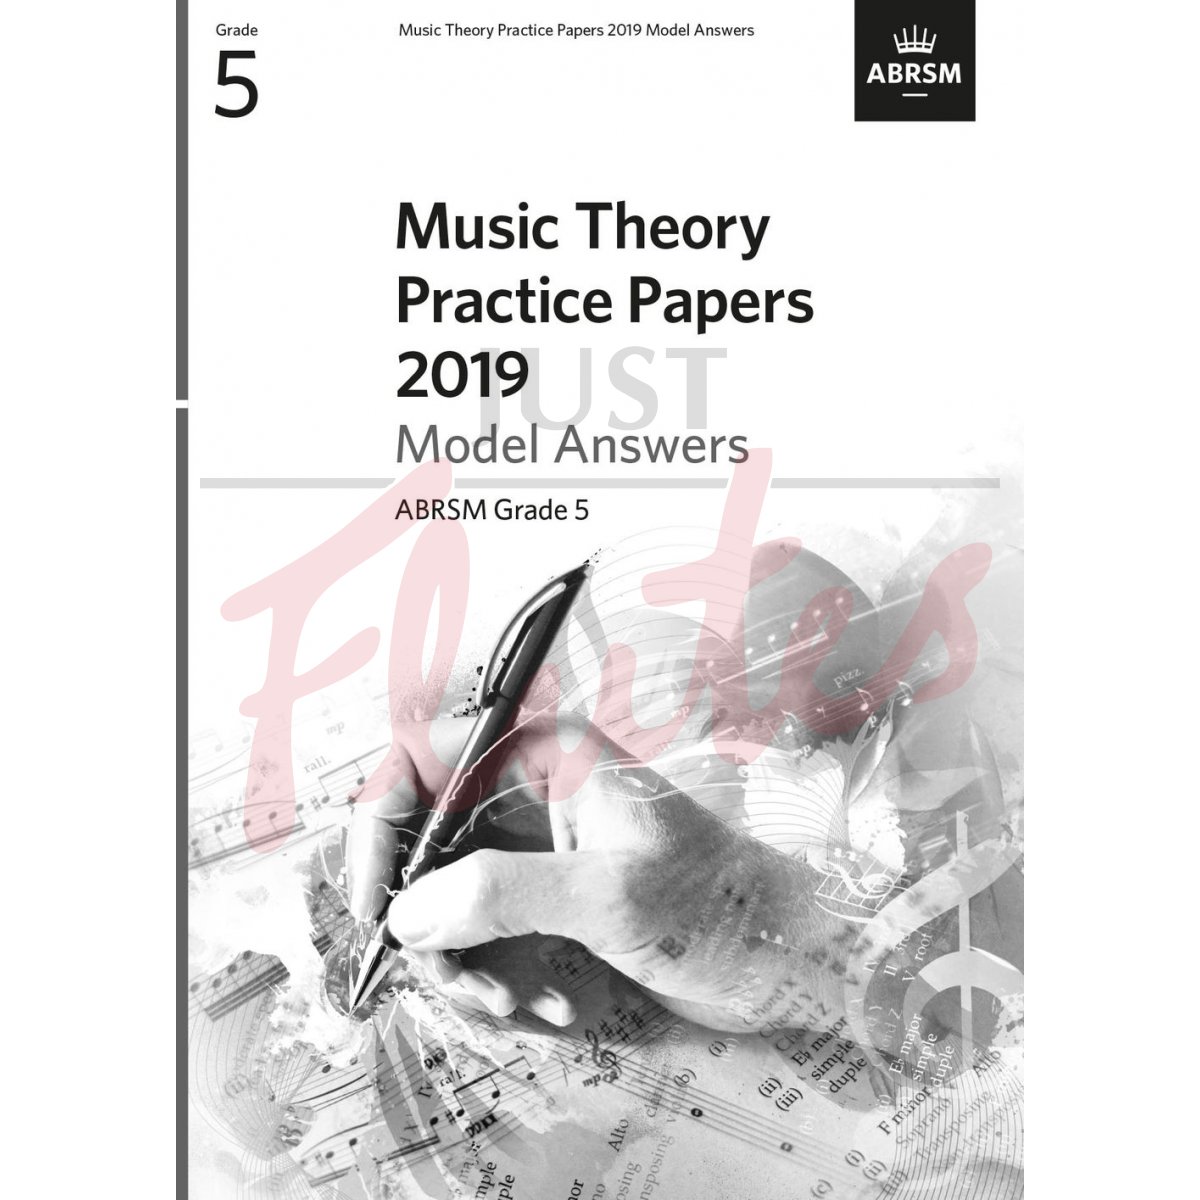 Music Theory Practice Papers 2019 Grade 5 - Model Answers